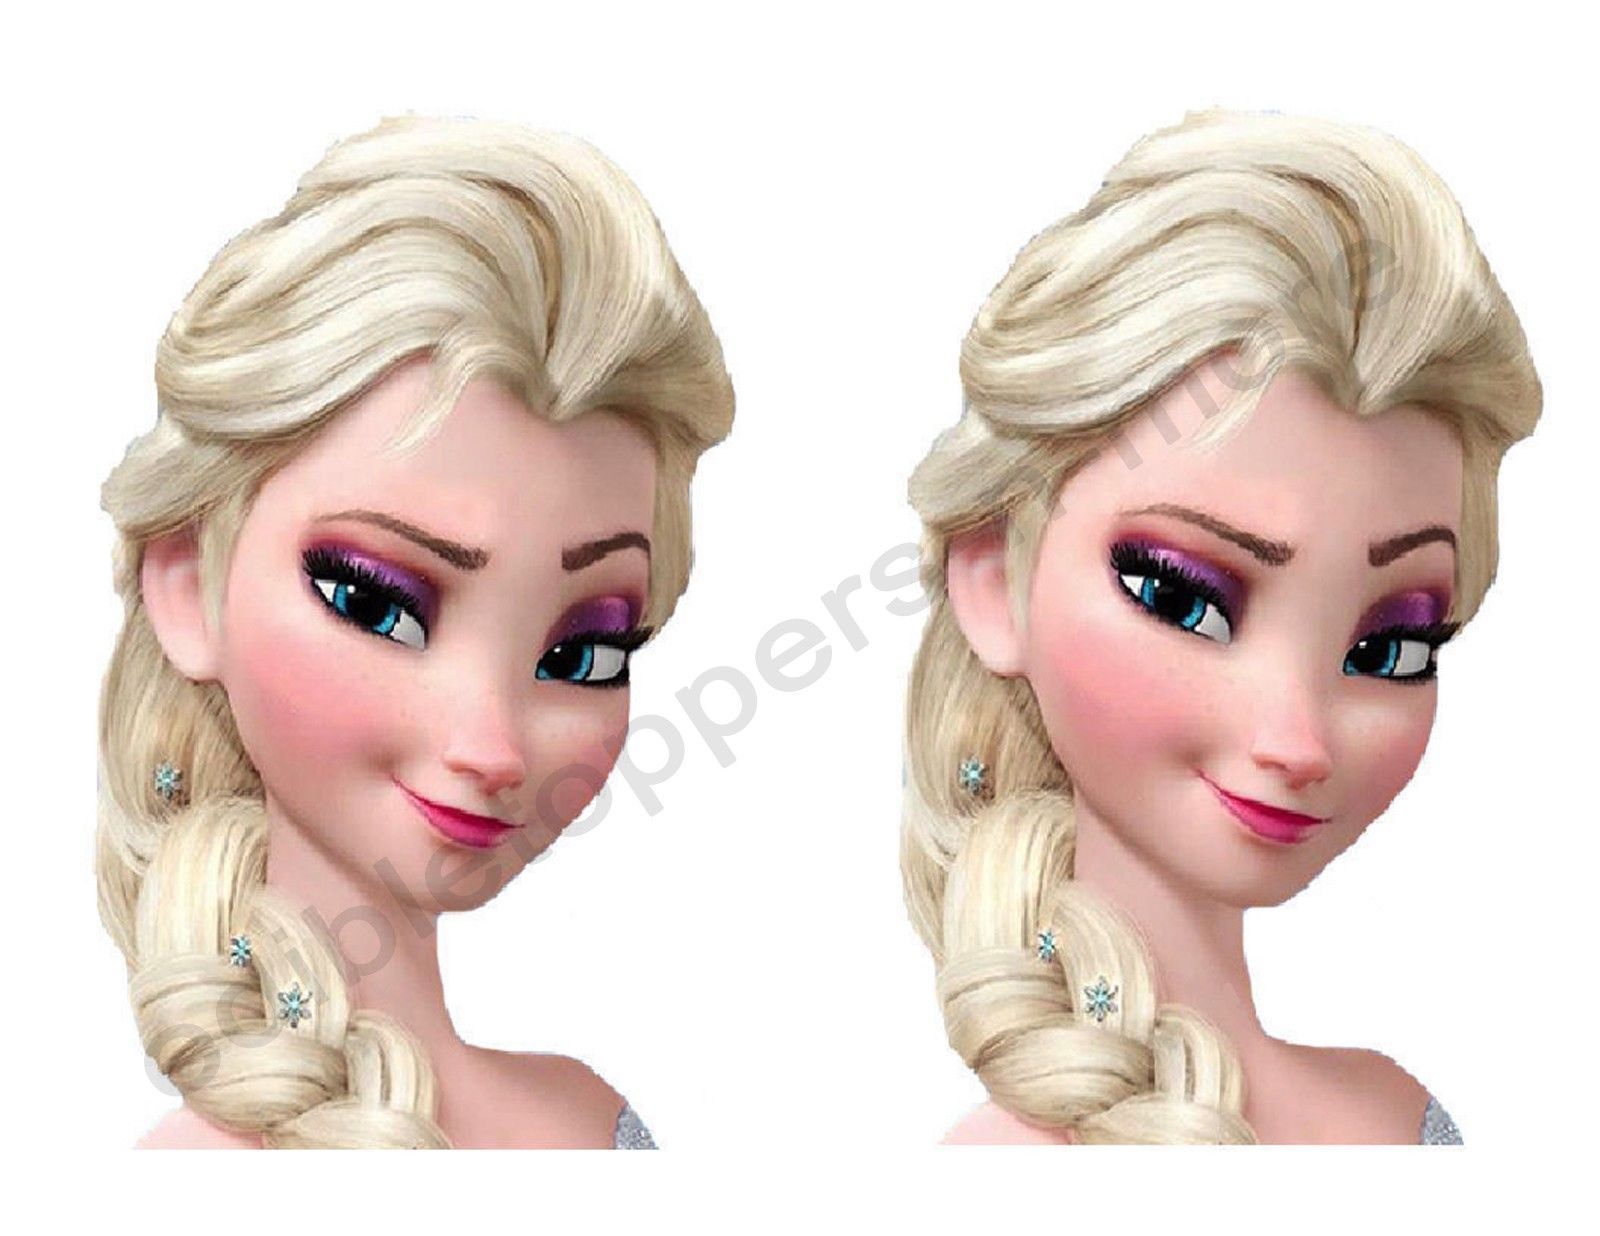 Disney's Frozen Elsa Personalized Edible Print Premium Cake Toppers Frosting Sheets 2 Sizes